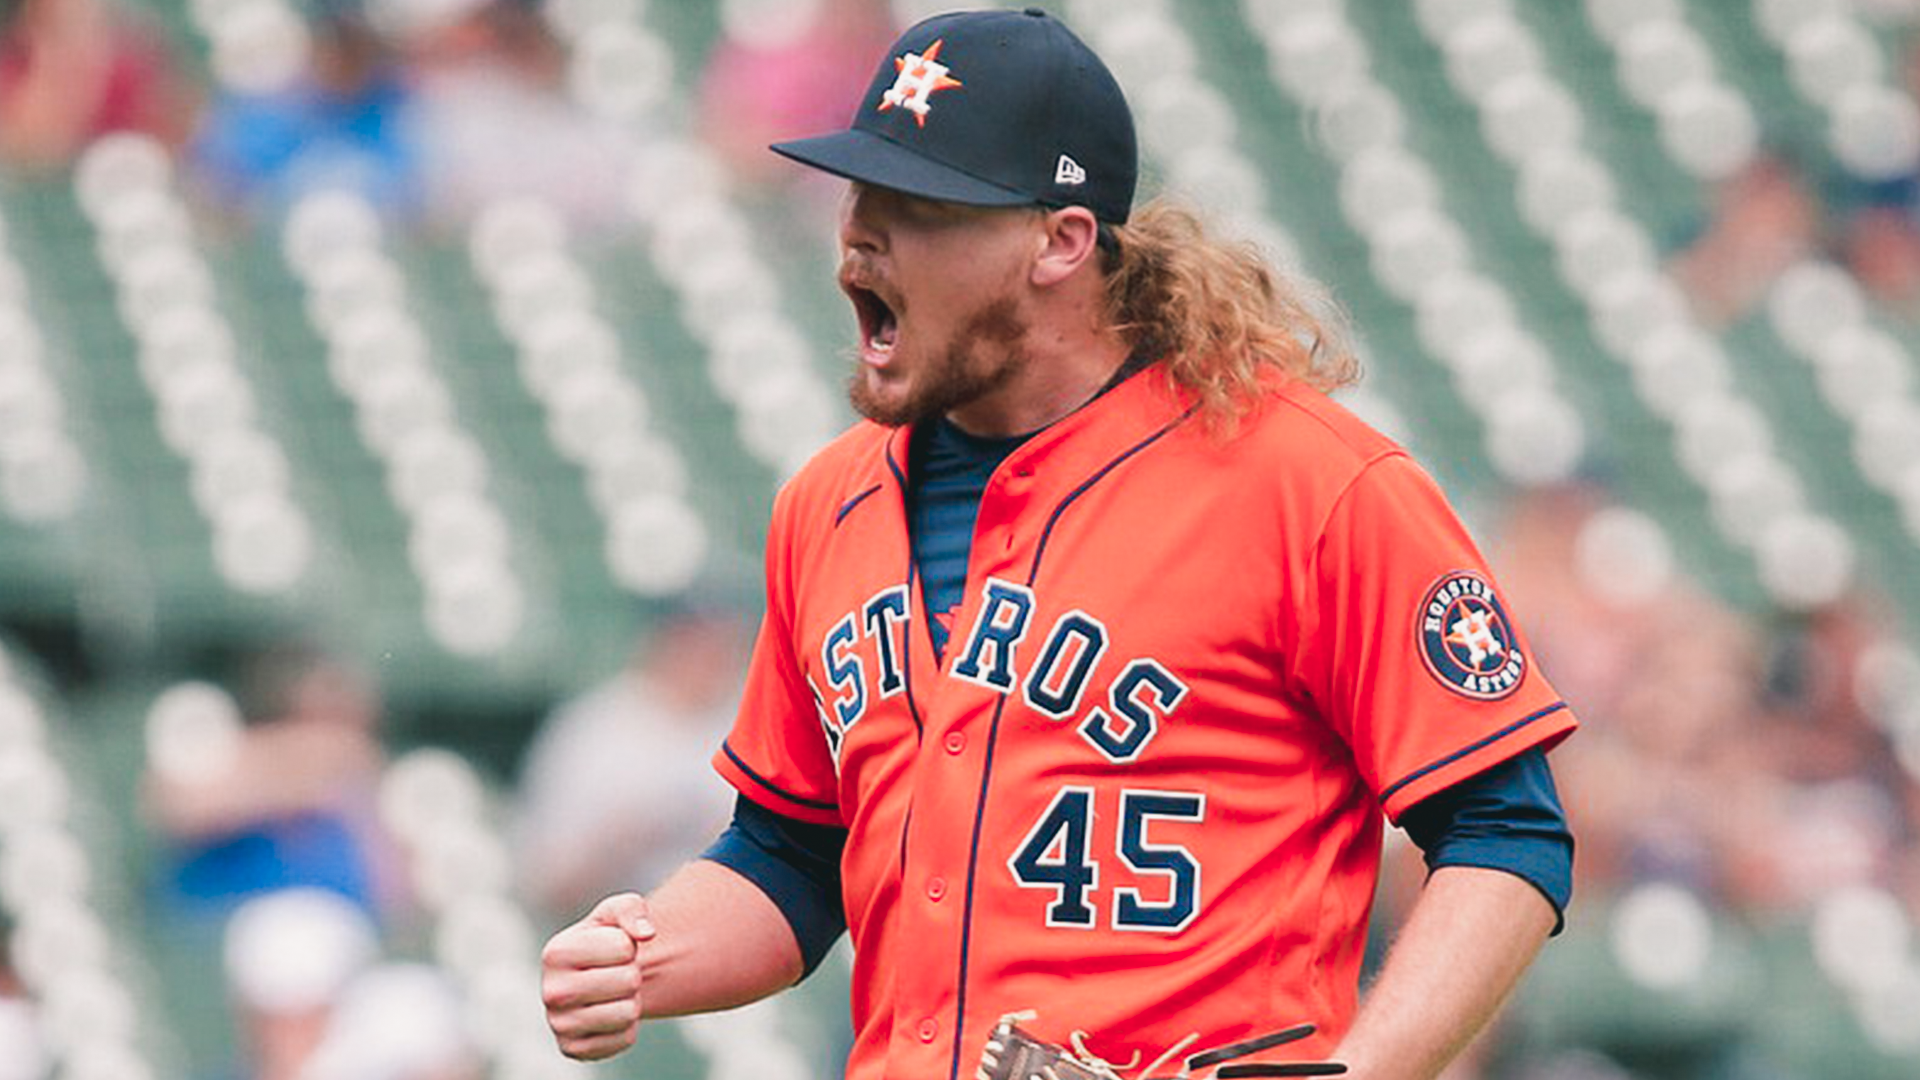 Houston Astros pitching staff dominant in MLB playoffs - The